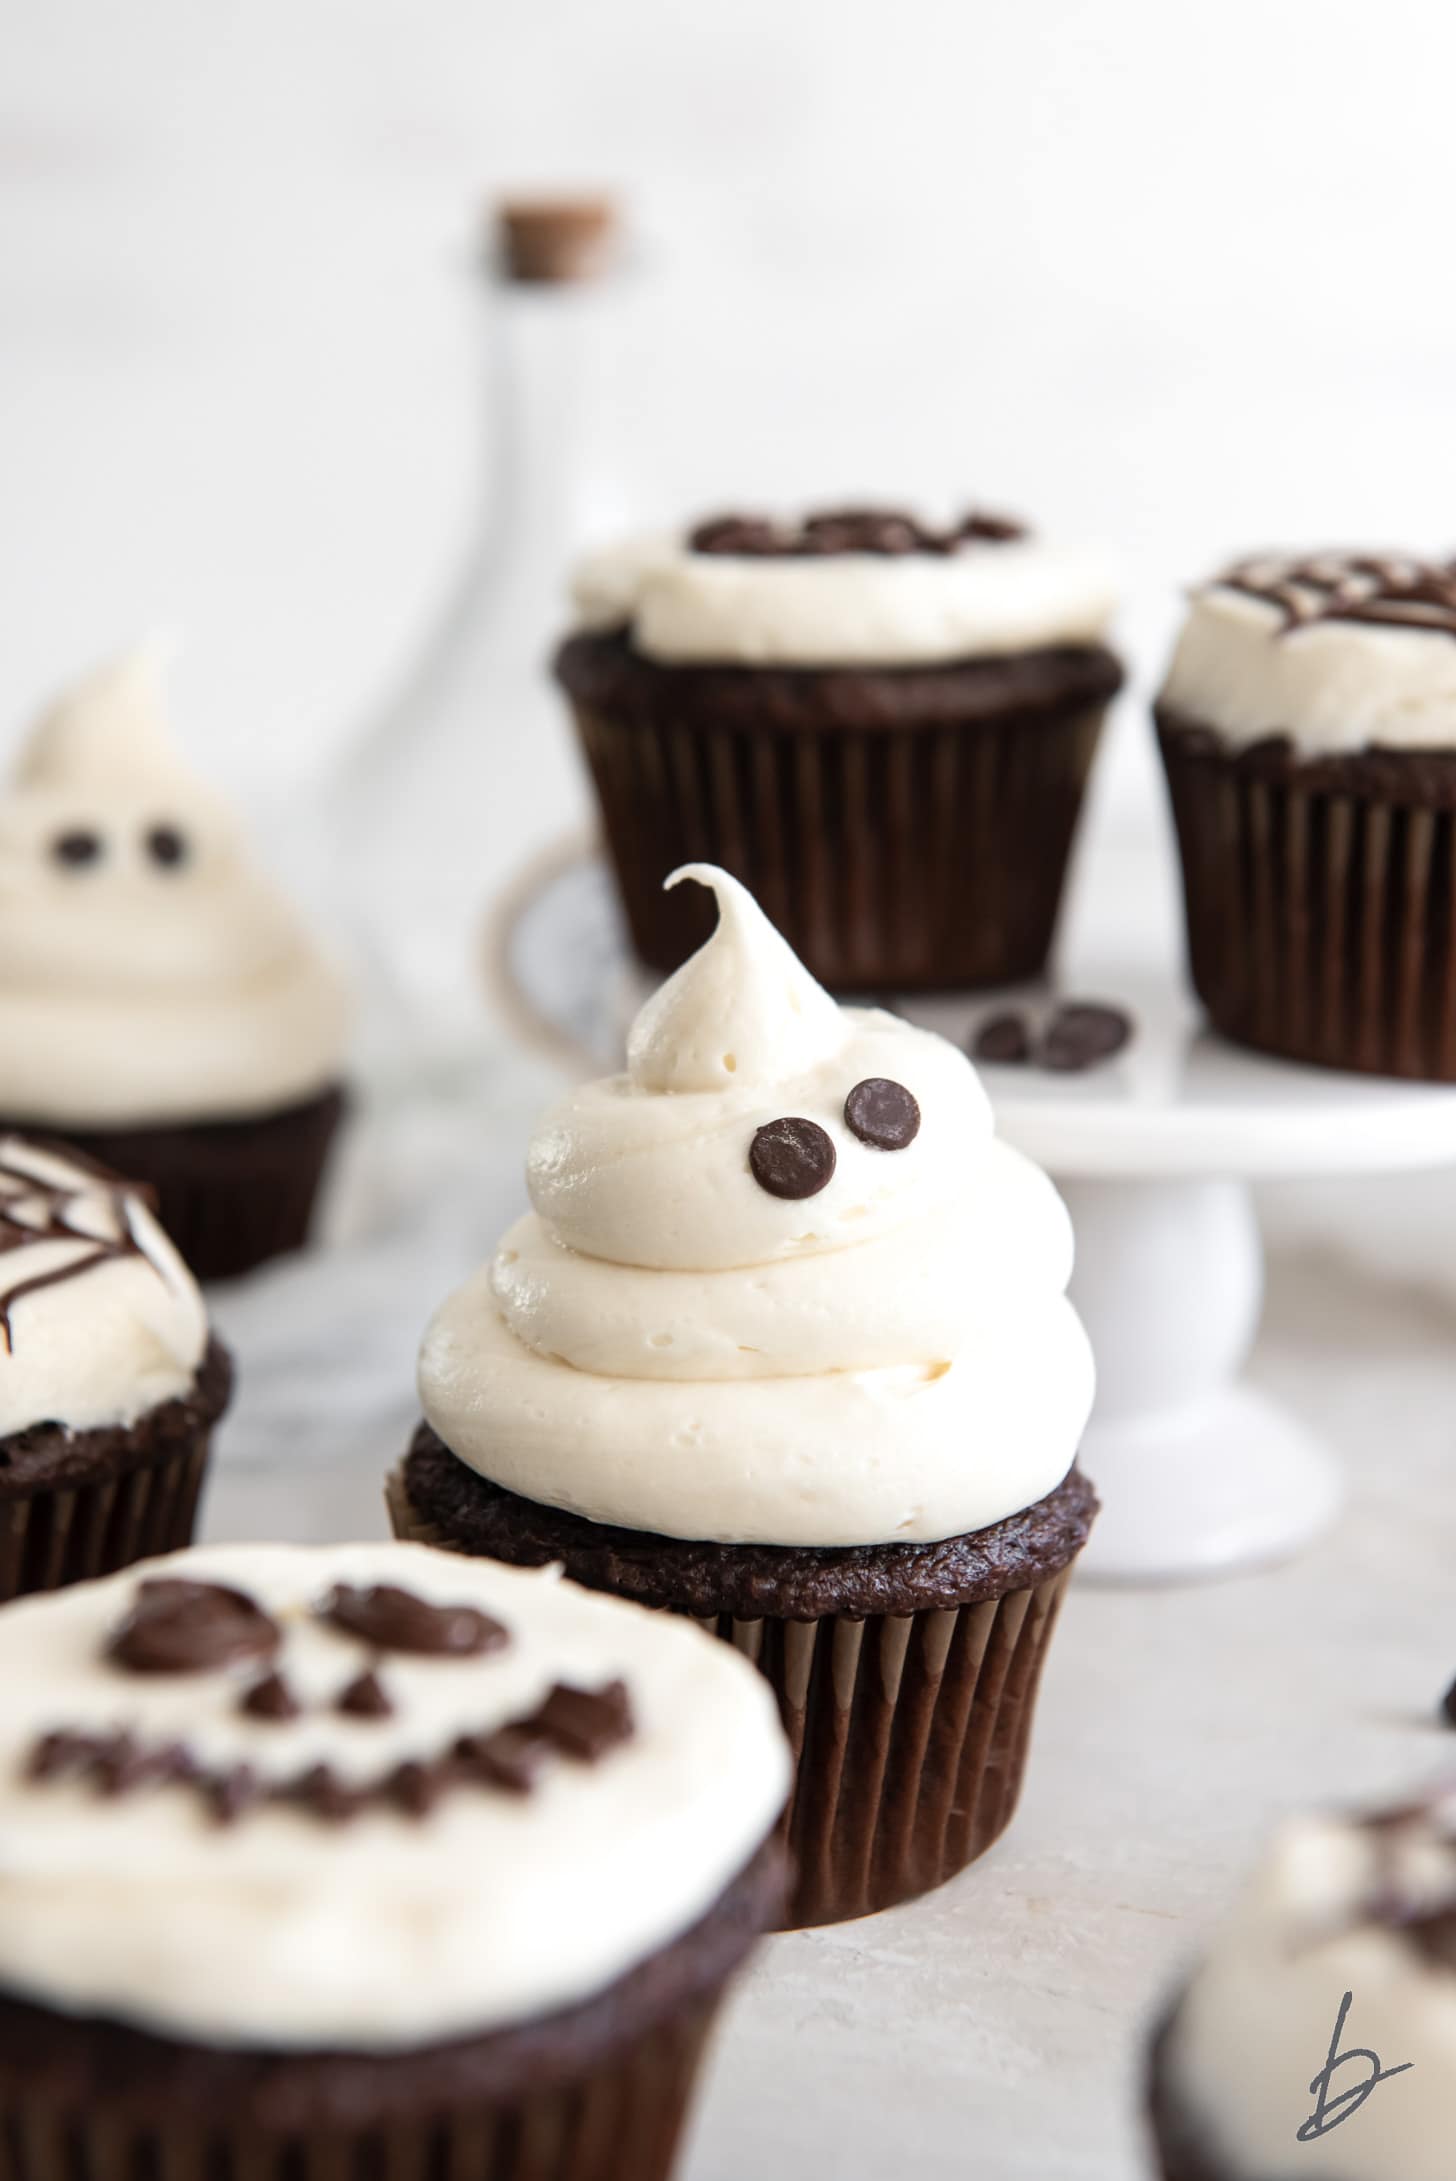 halloween cupcake decorated like a ghost with vanilla frosting and chocolate chip eyes.